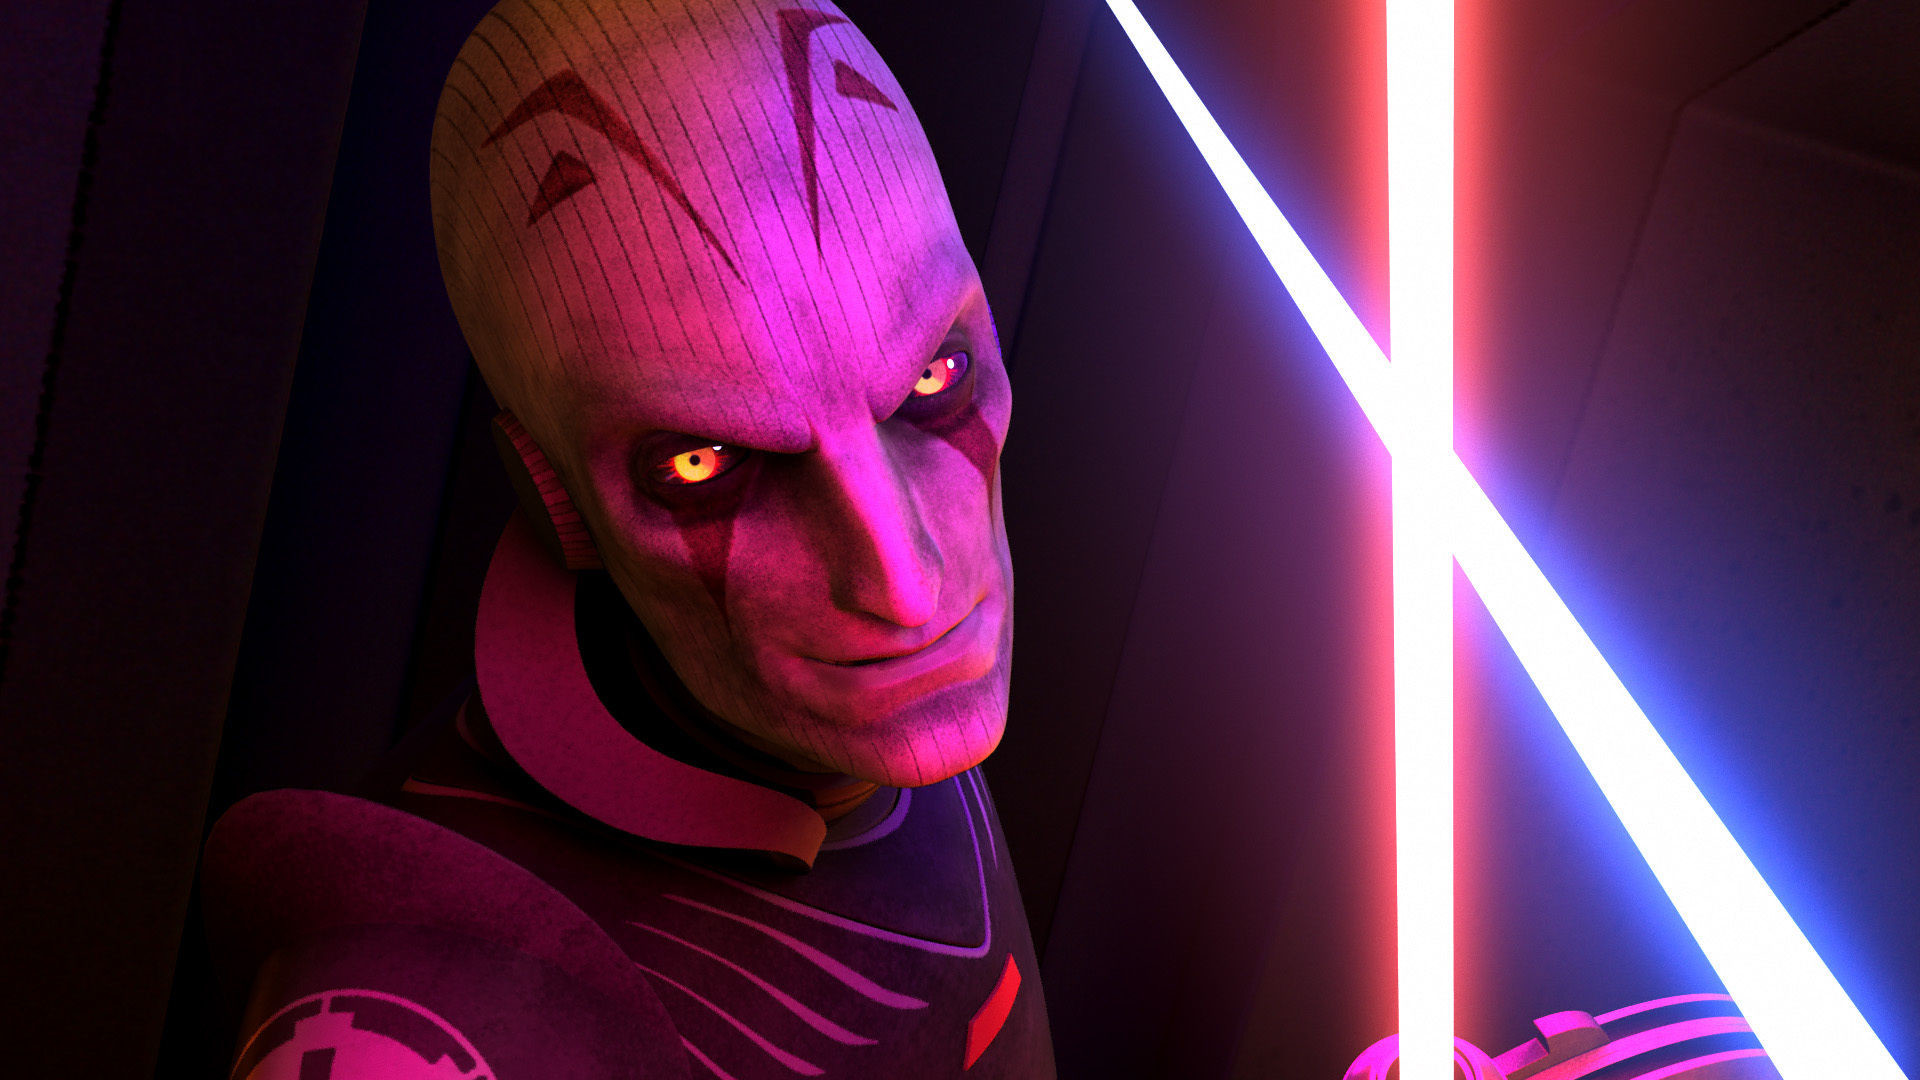 1920x1080 Star Wars Rebels - The Inquisitor